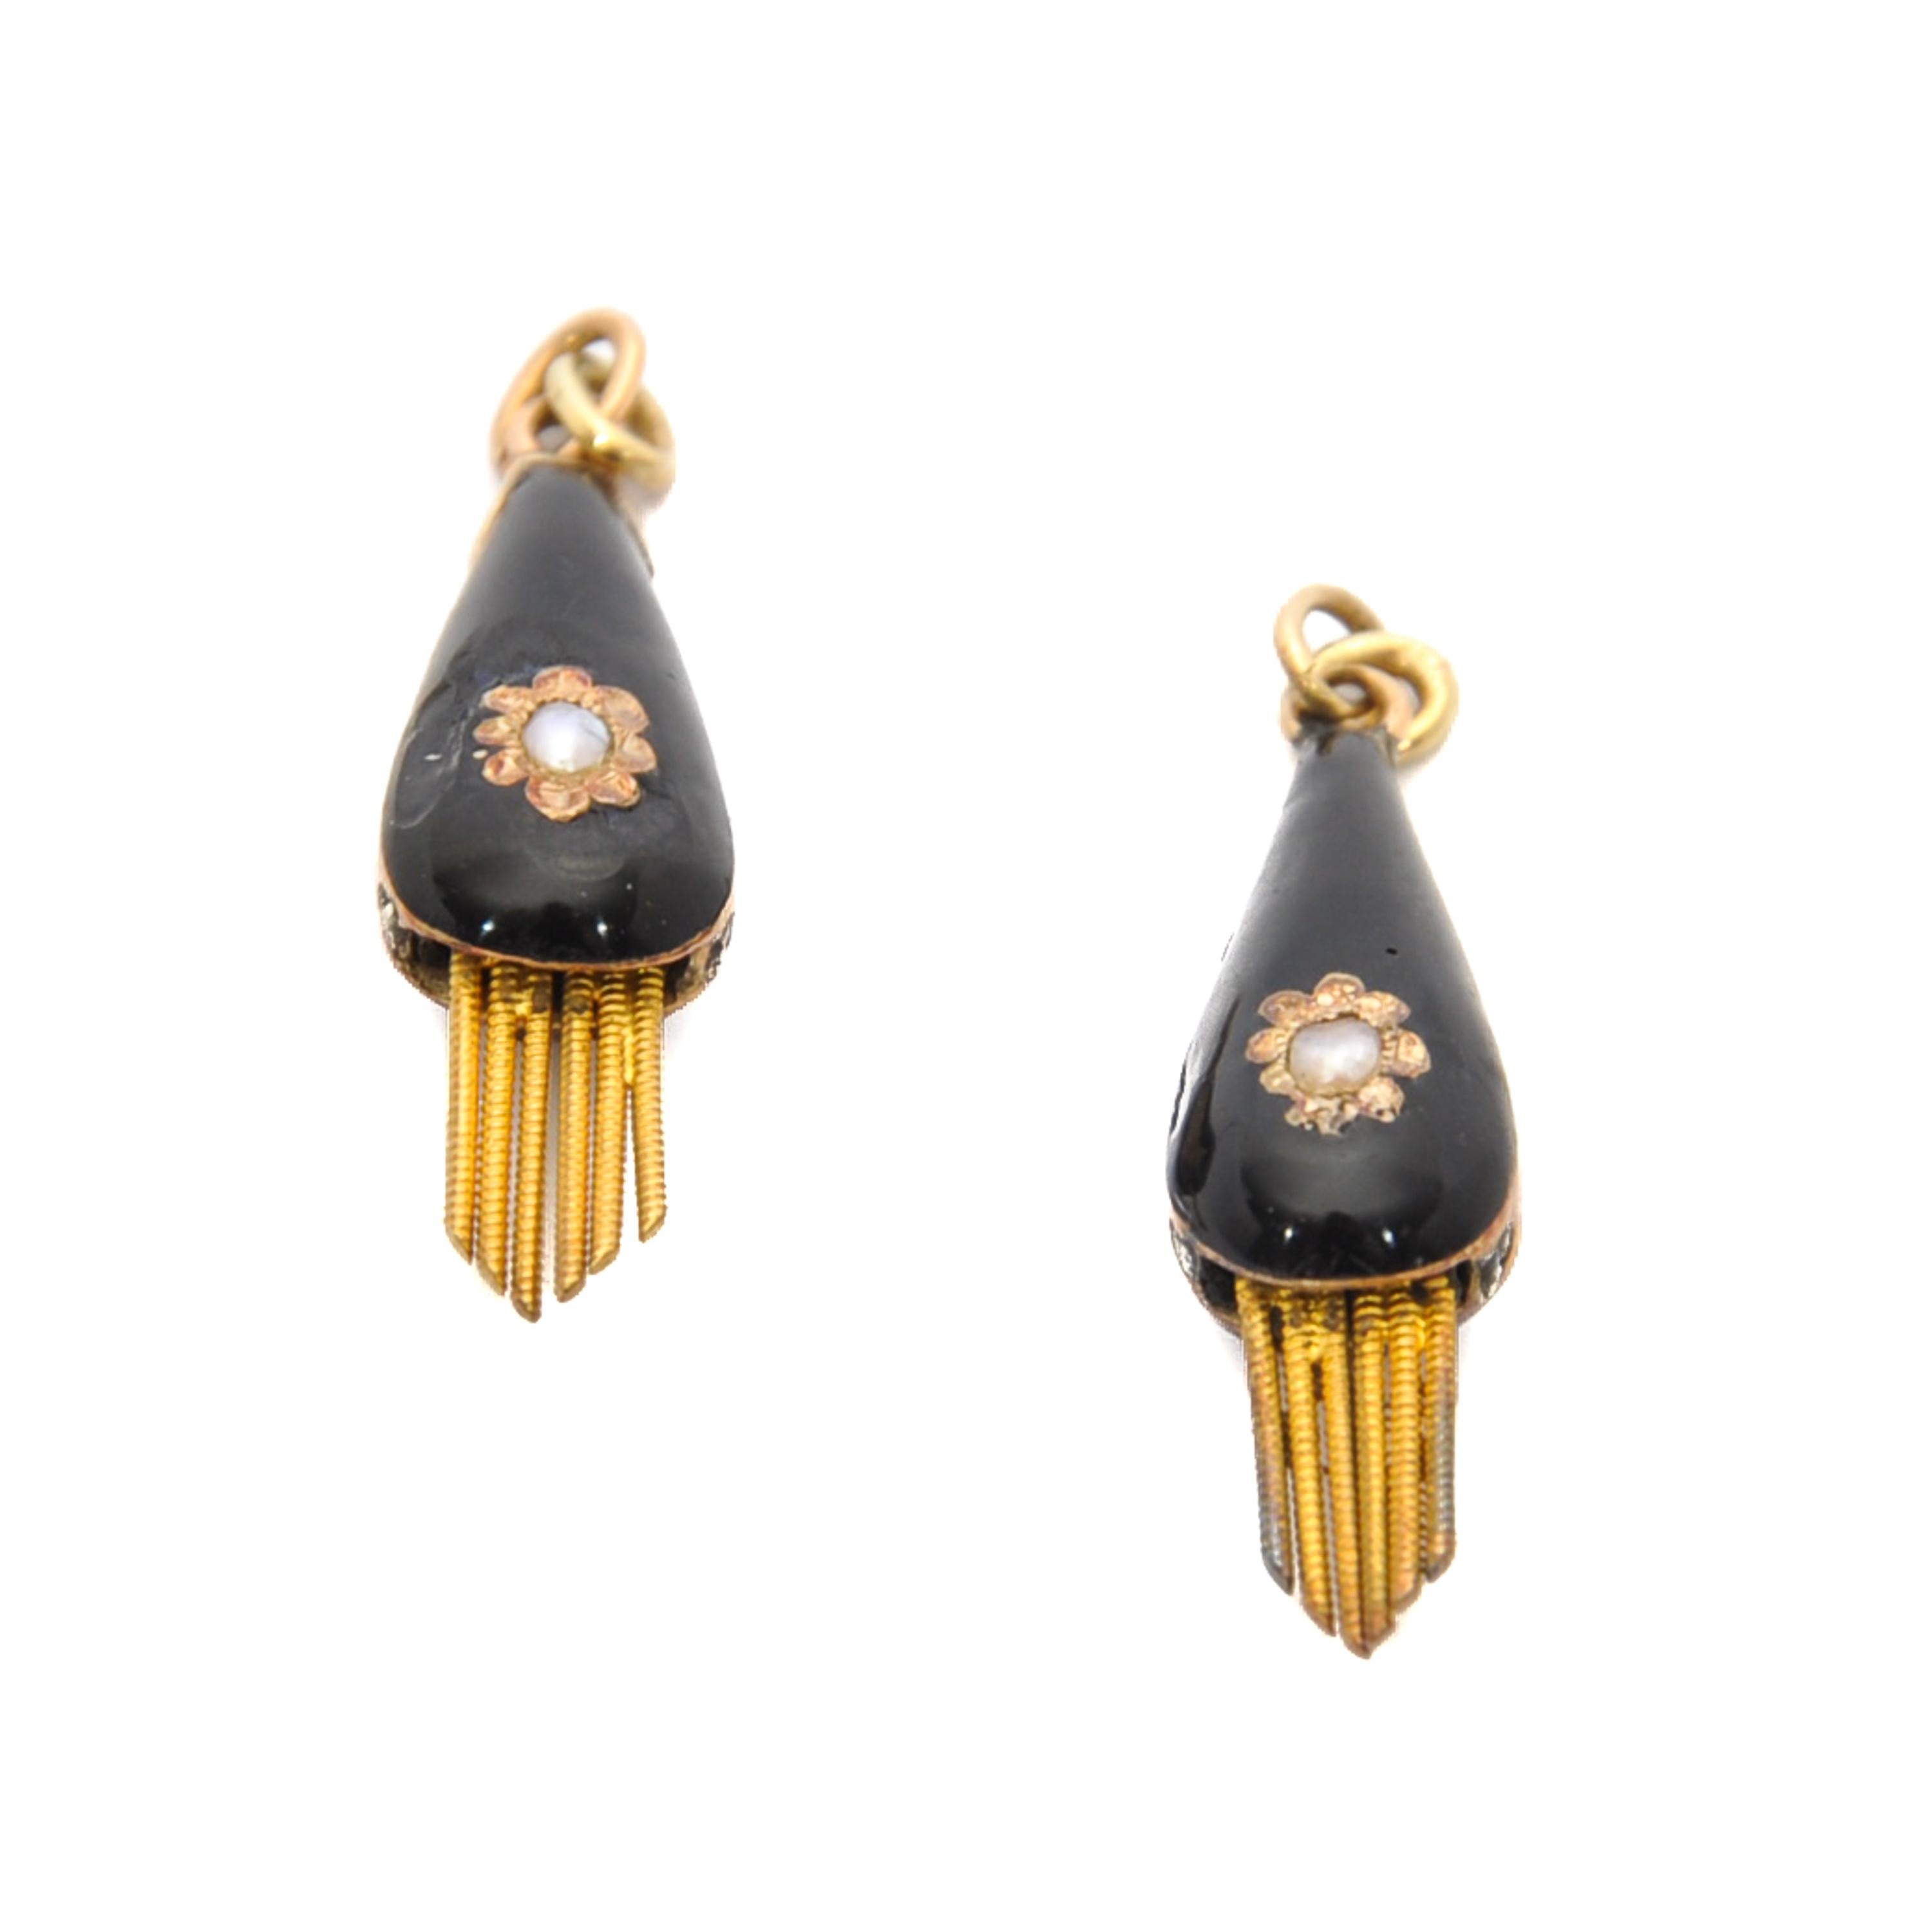 This small couple of onyx and pearl pendants are quite unique. They are beautifully adorned with a gold flower pattern, a seed pearl and gold firm tassels below te top. Each pendant is provided with a gold eyelet and looks gorgeous on a necklace